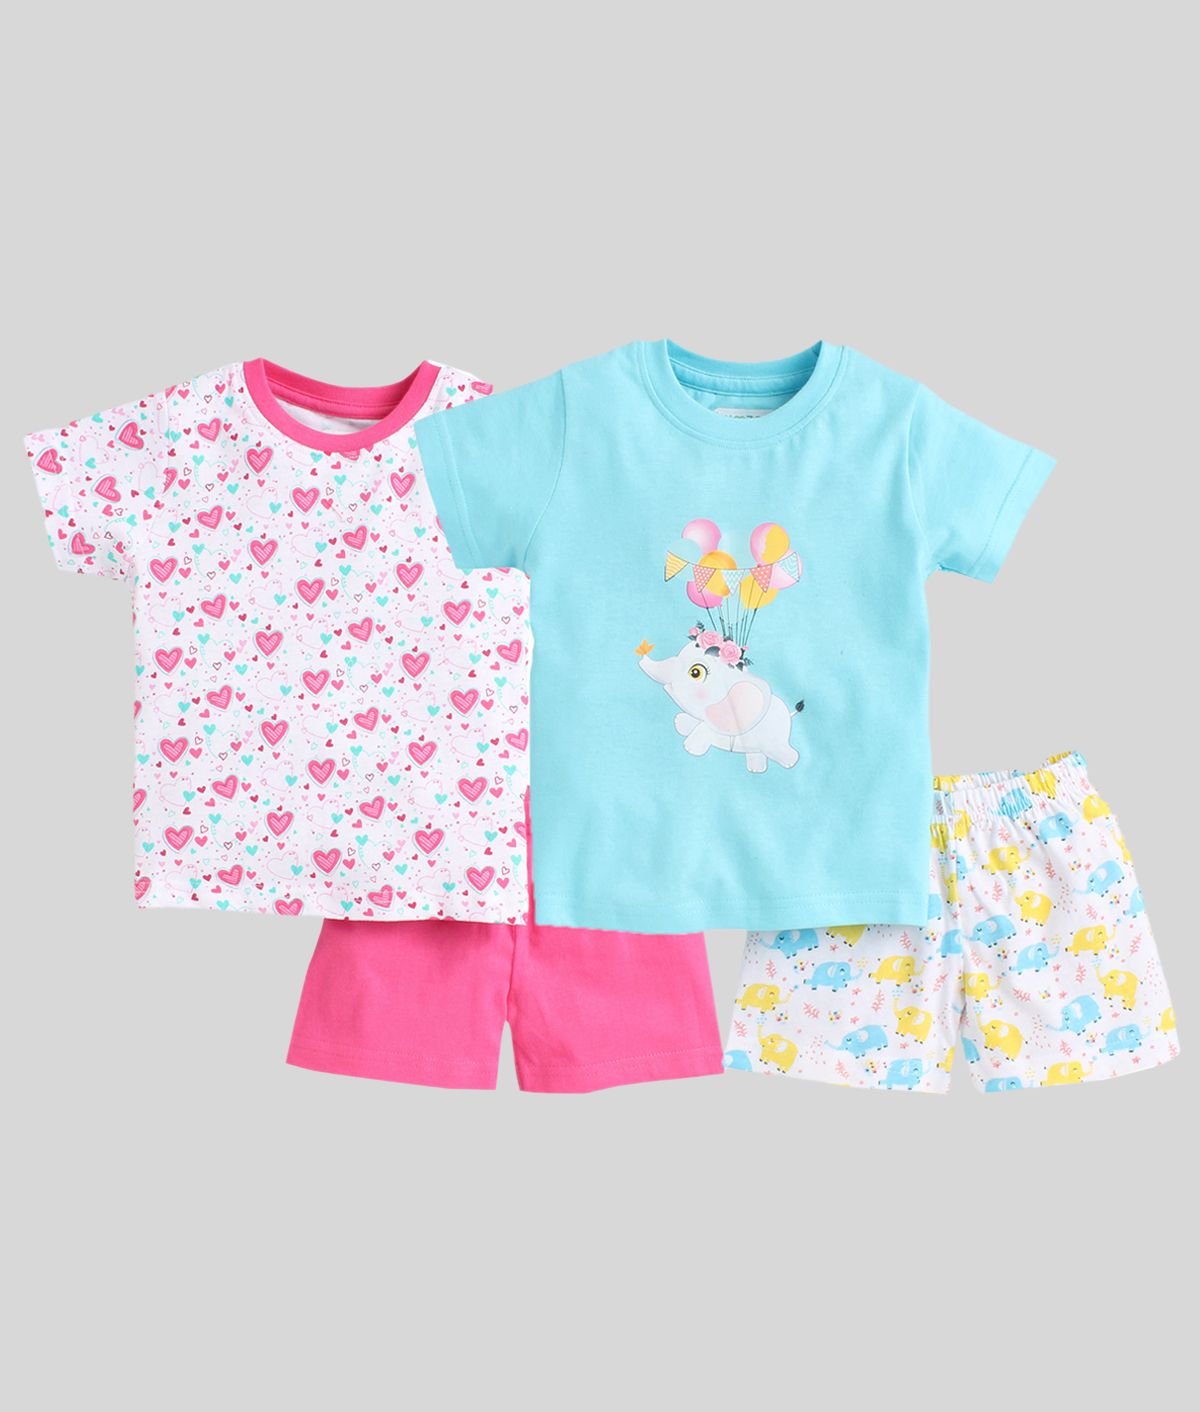     			BUMZEE Blue & Pink Baby Girls T-Shirt & Shorts Set Pack of 2 Age - 3-6 Months